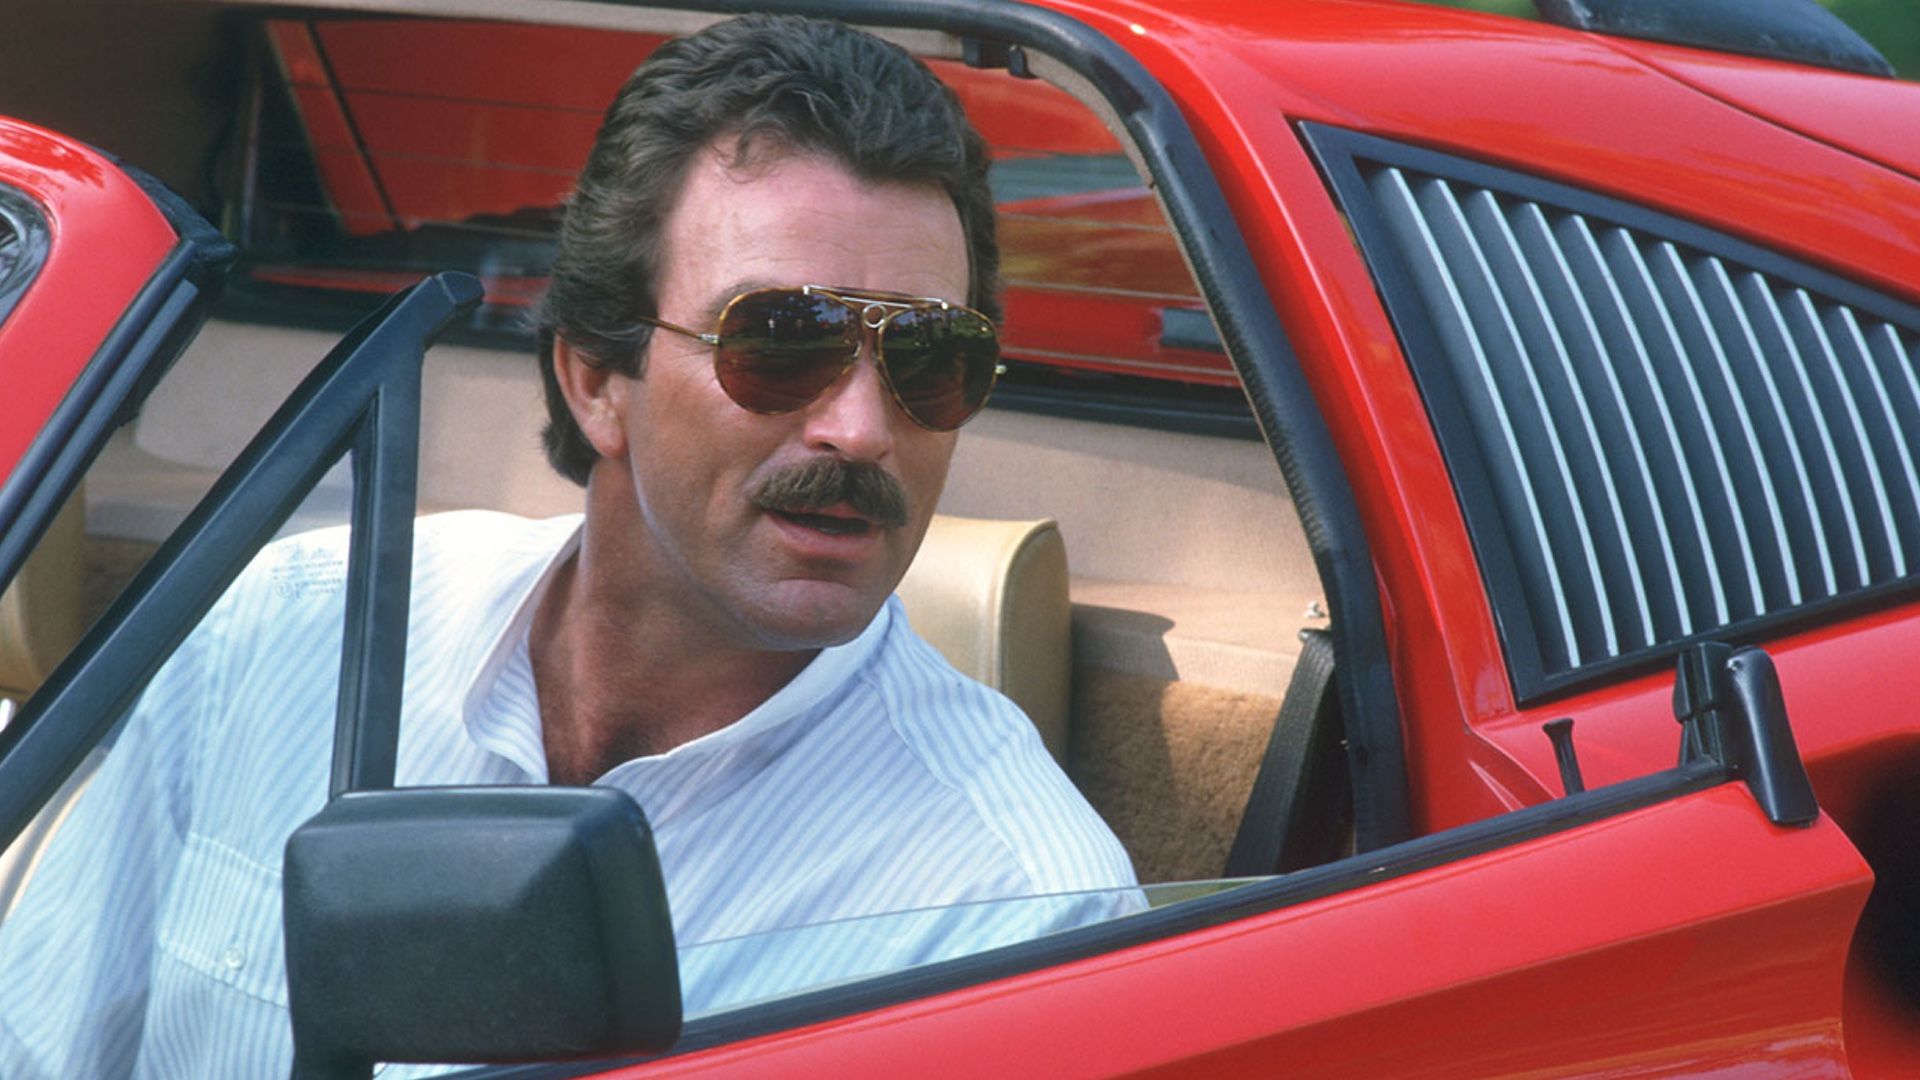 The Classic Series MAGNUM P.I. is Getting a Reboot at CBS